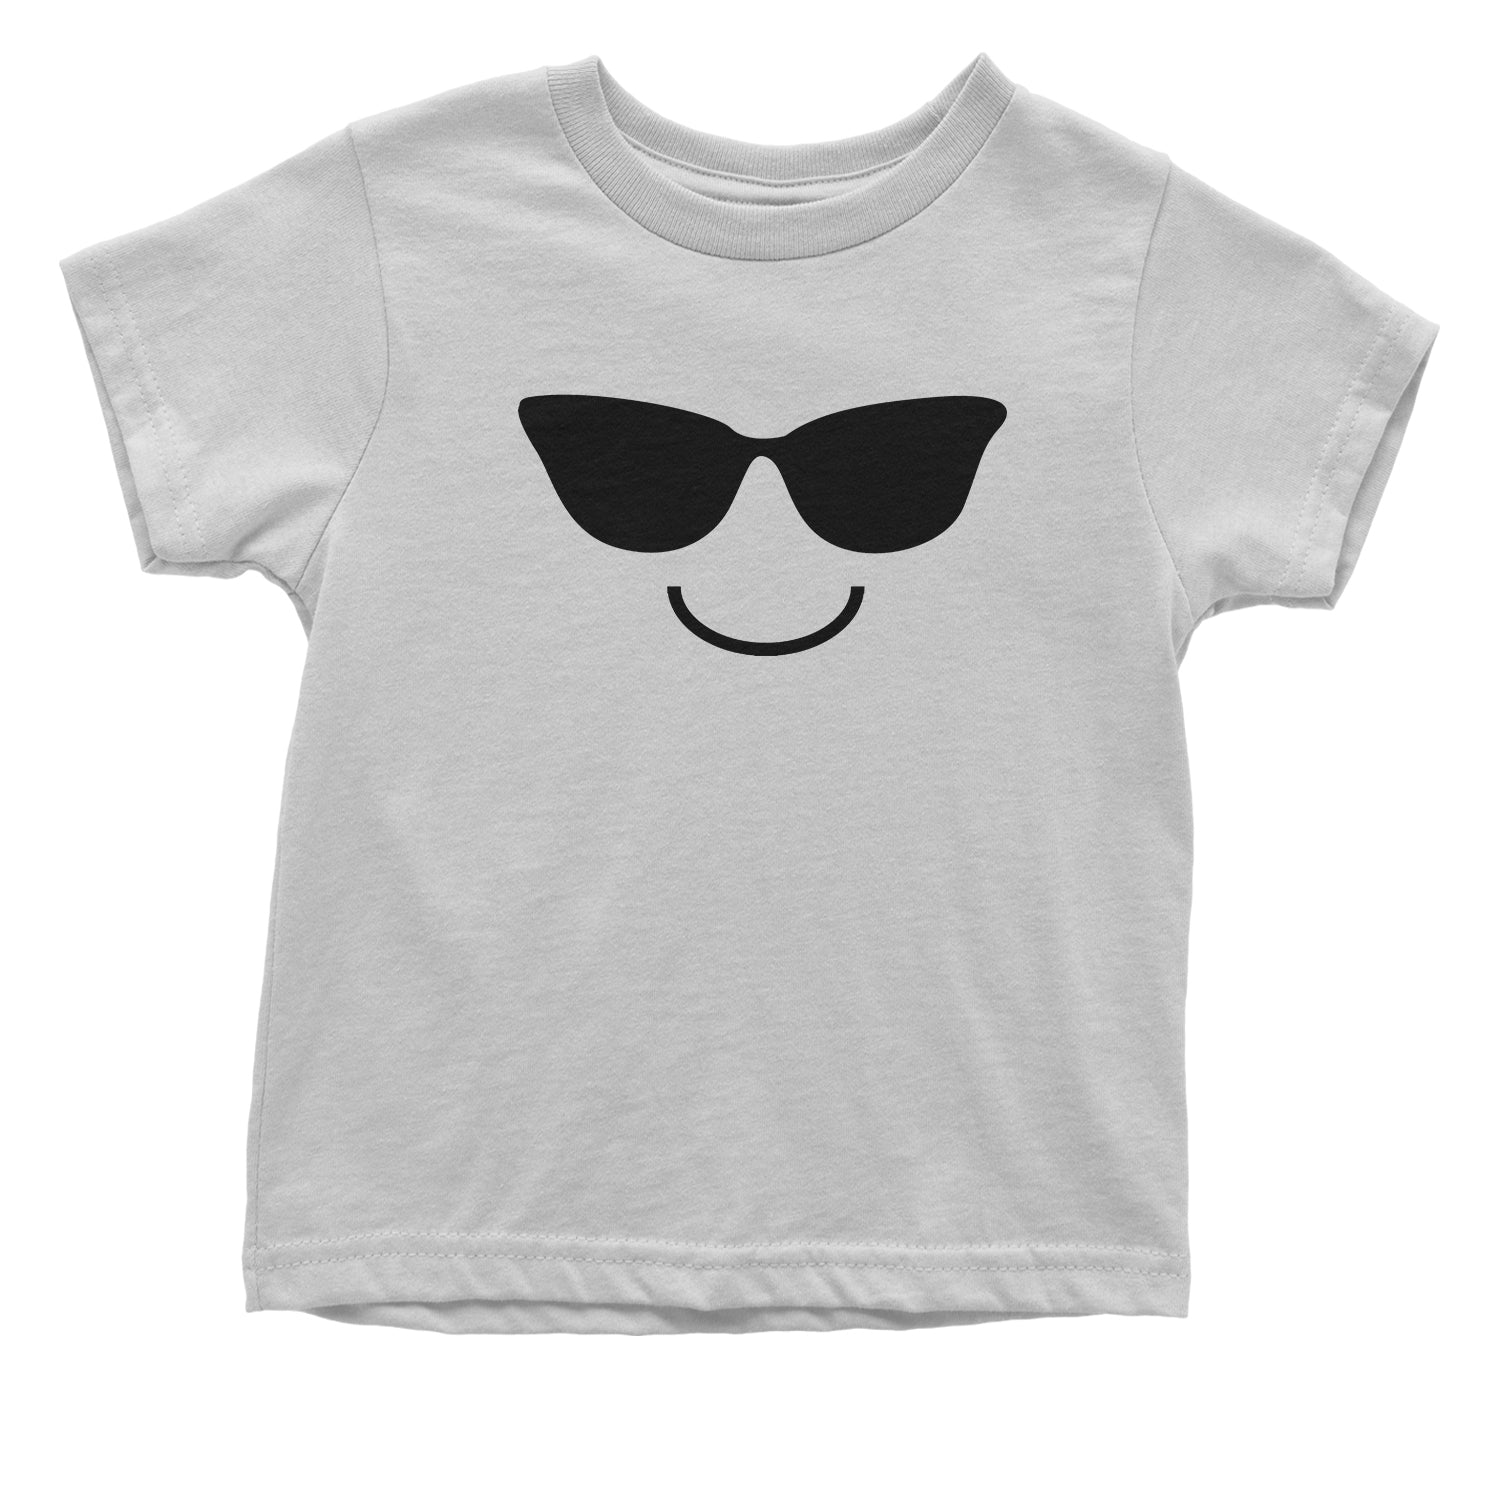 Emoticon Sunglasses Smile Face Toddler T-Shirt cosplay, costume, dress, emoji, emote, face, halloween, smiley, up, yellow by Expression Tees